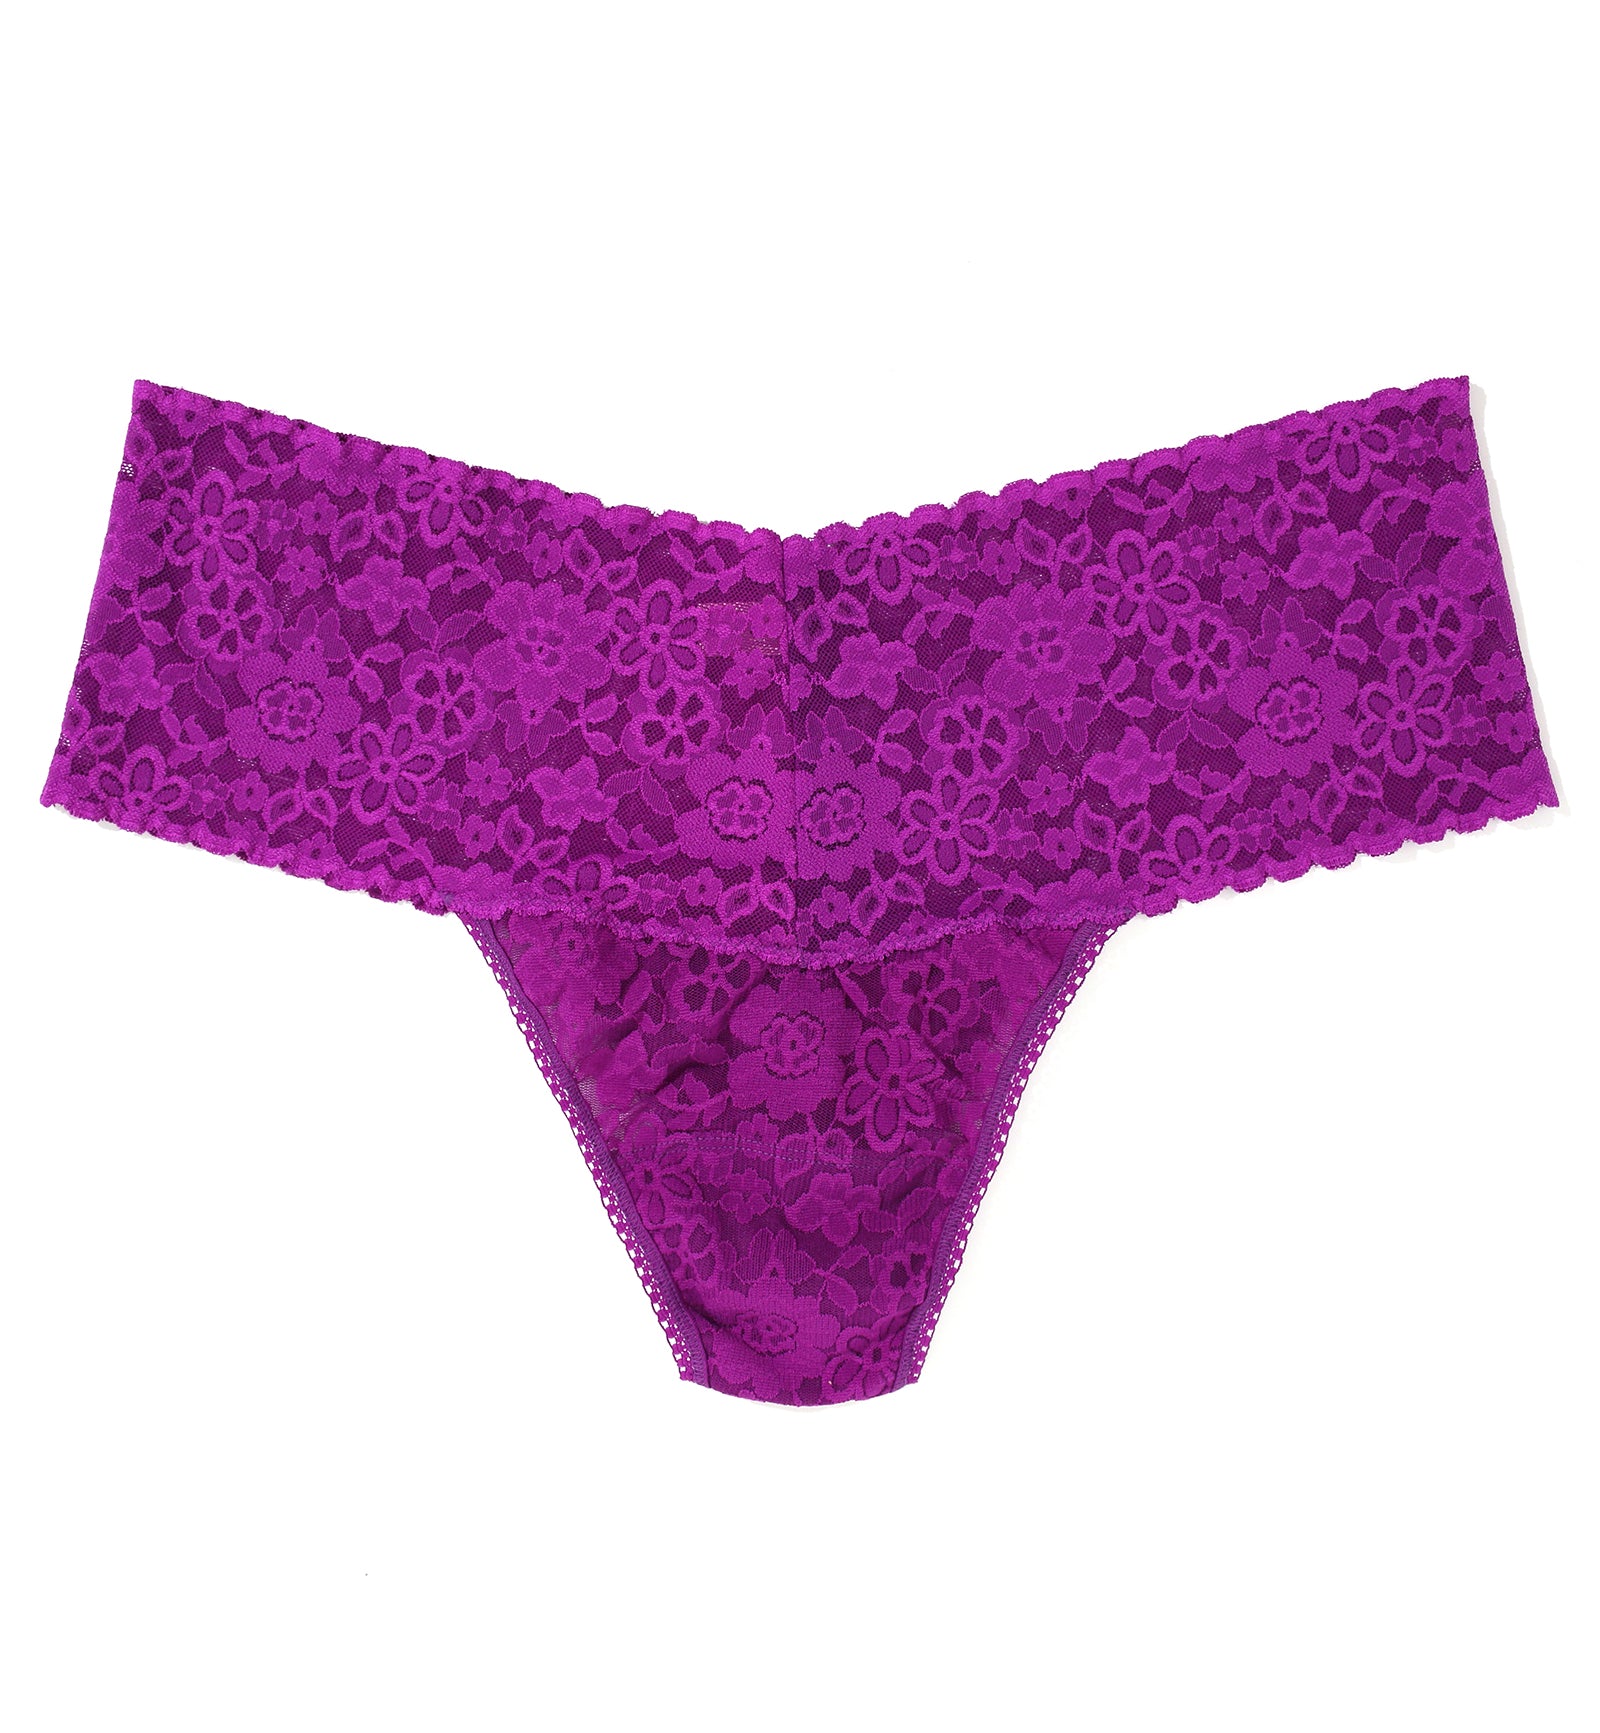 Hanky Panky Daily Lace Retro Thong PLUS (771922X),Aster Garland - Aster Garland,One Size